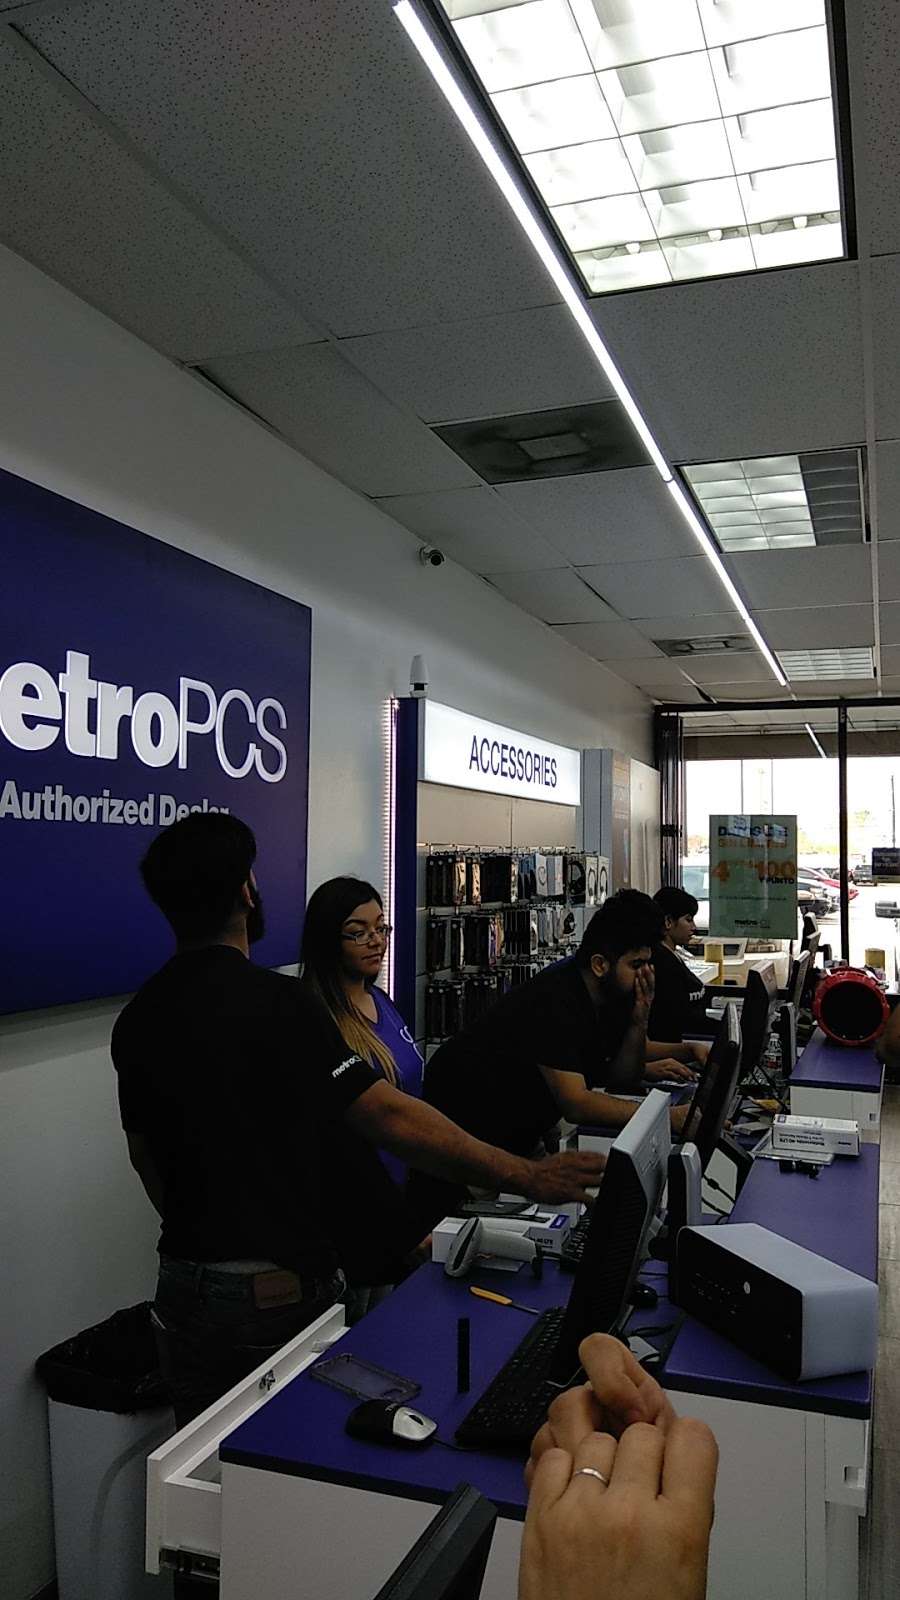 Metro by T-Mobile | 7404 Airline Dr Ste G, Houston, TX 77076, USA | Phone: (713) 692-8820